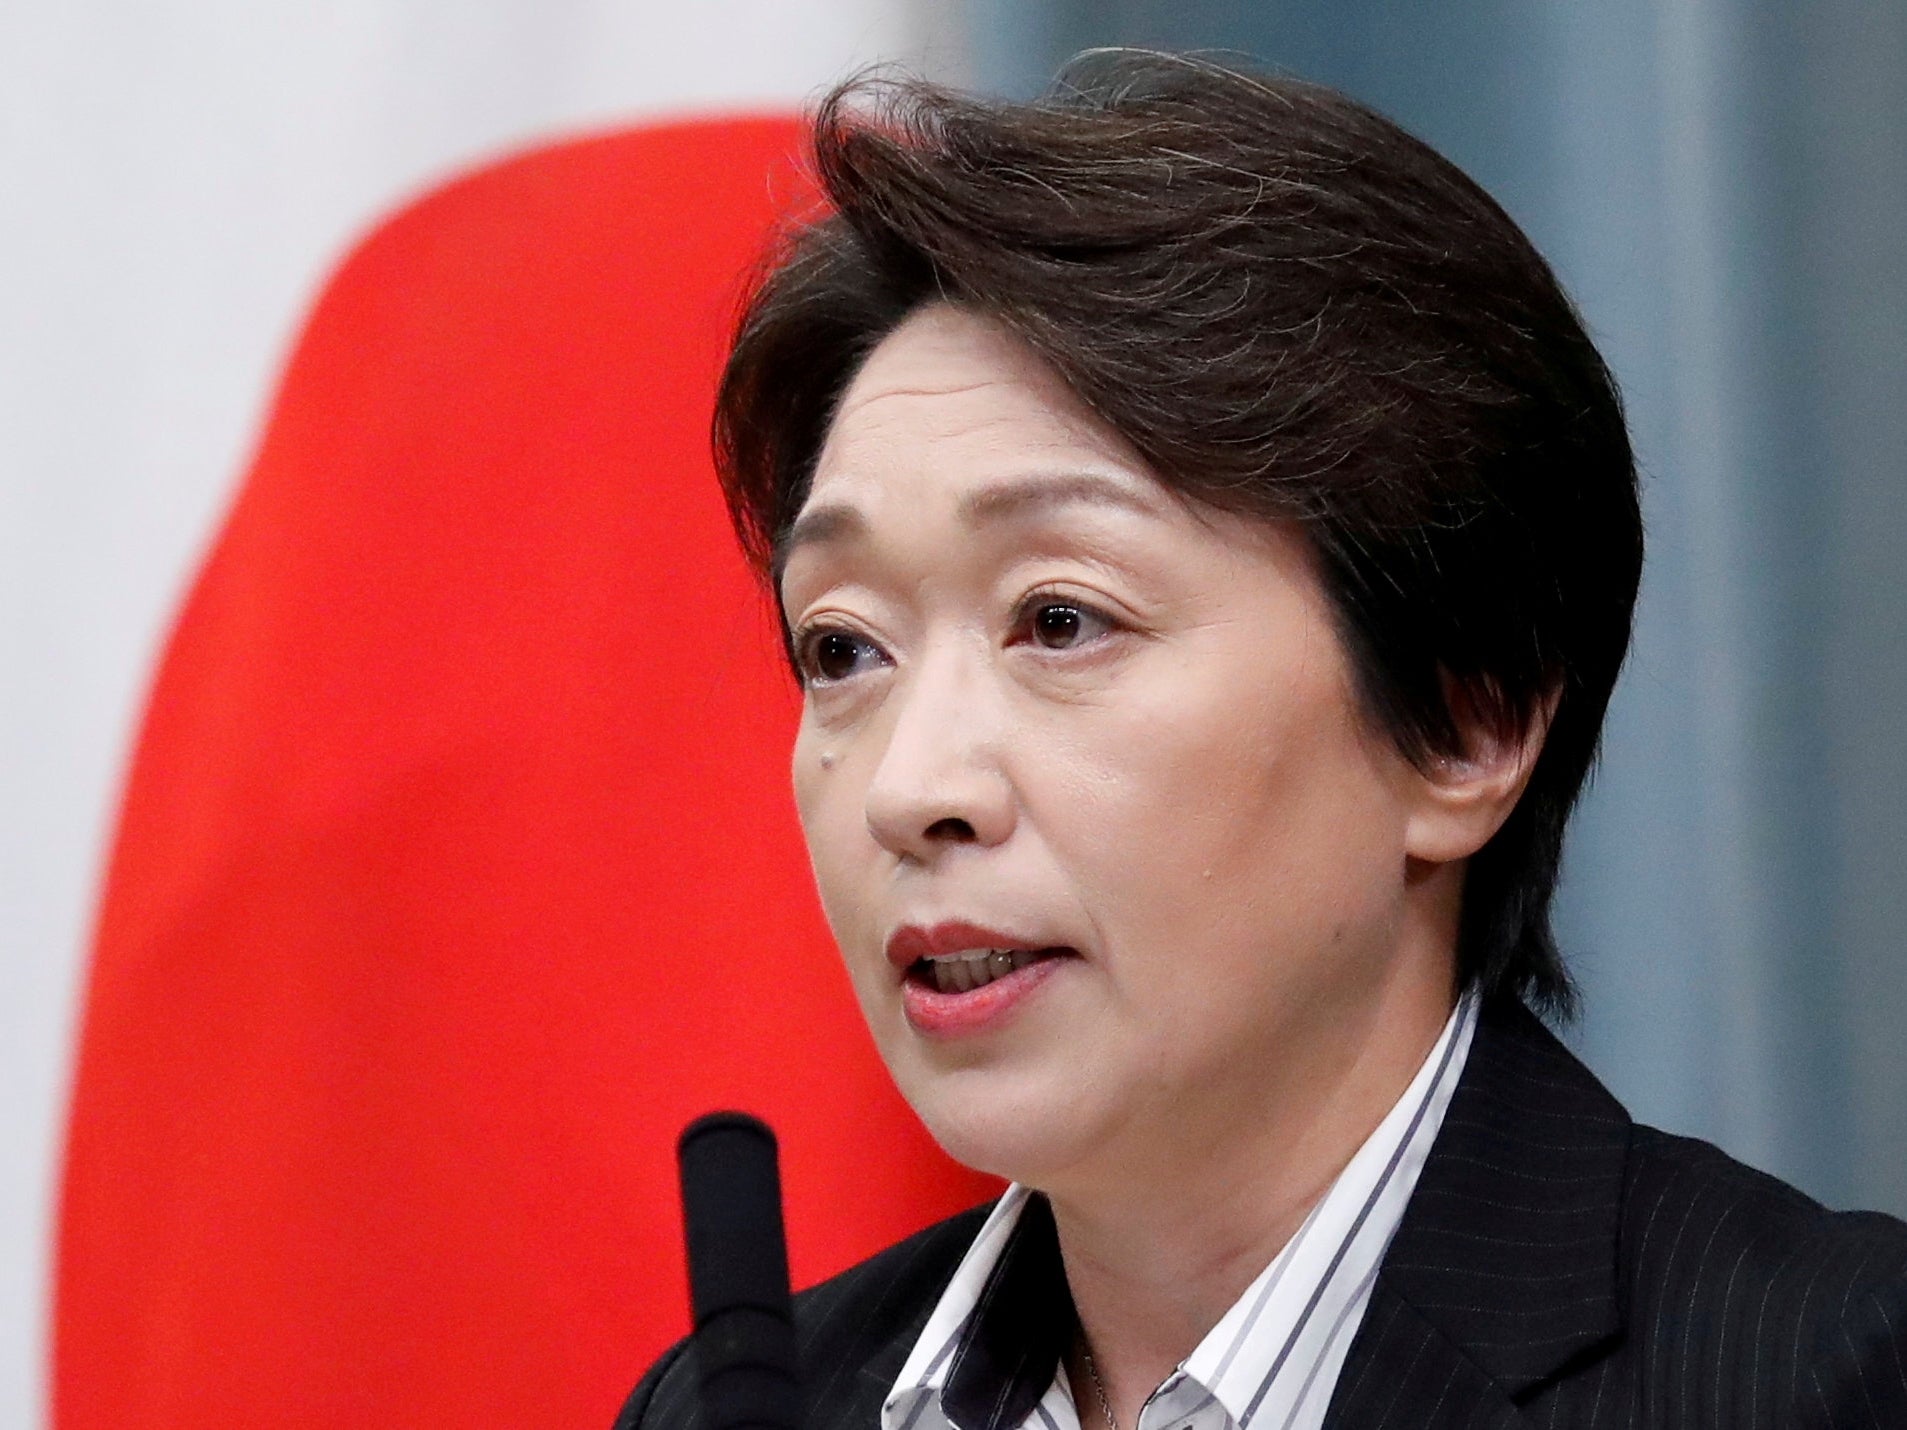 Seiko Hashimoto takes over as the head of the Tokyo 2020 organising committee